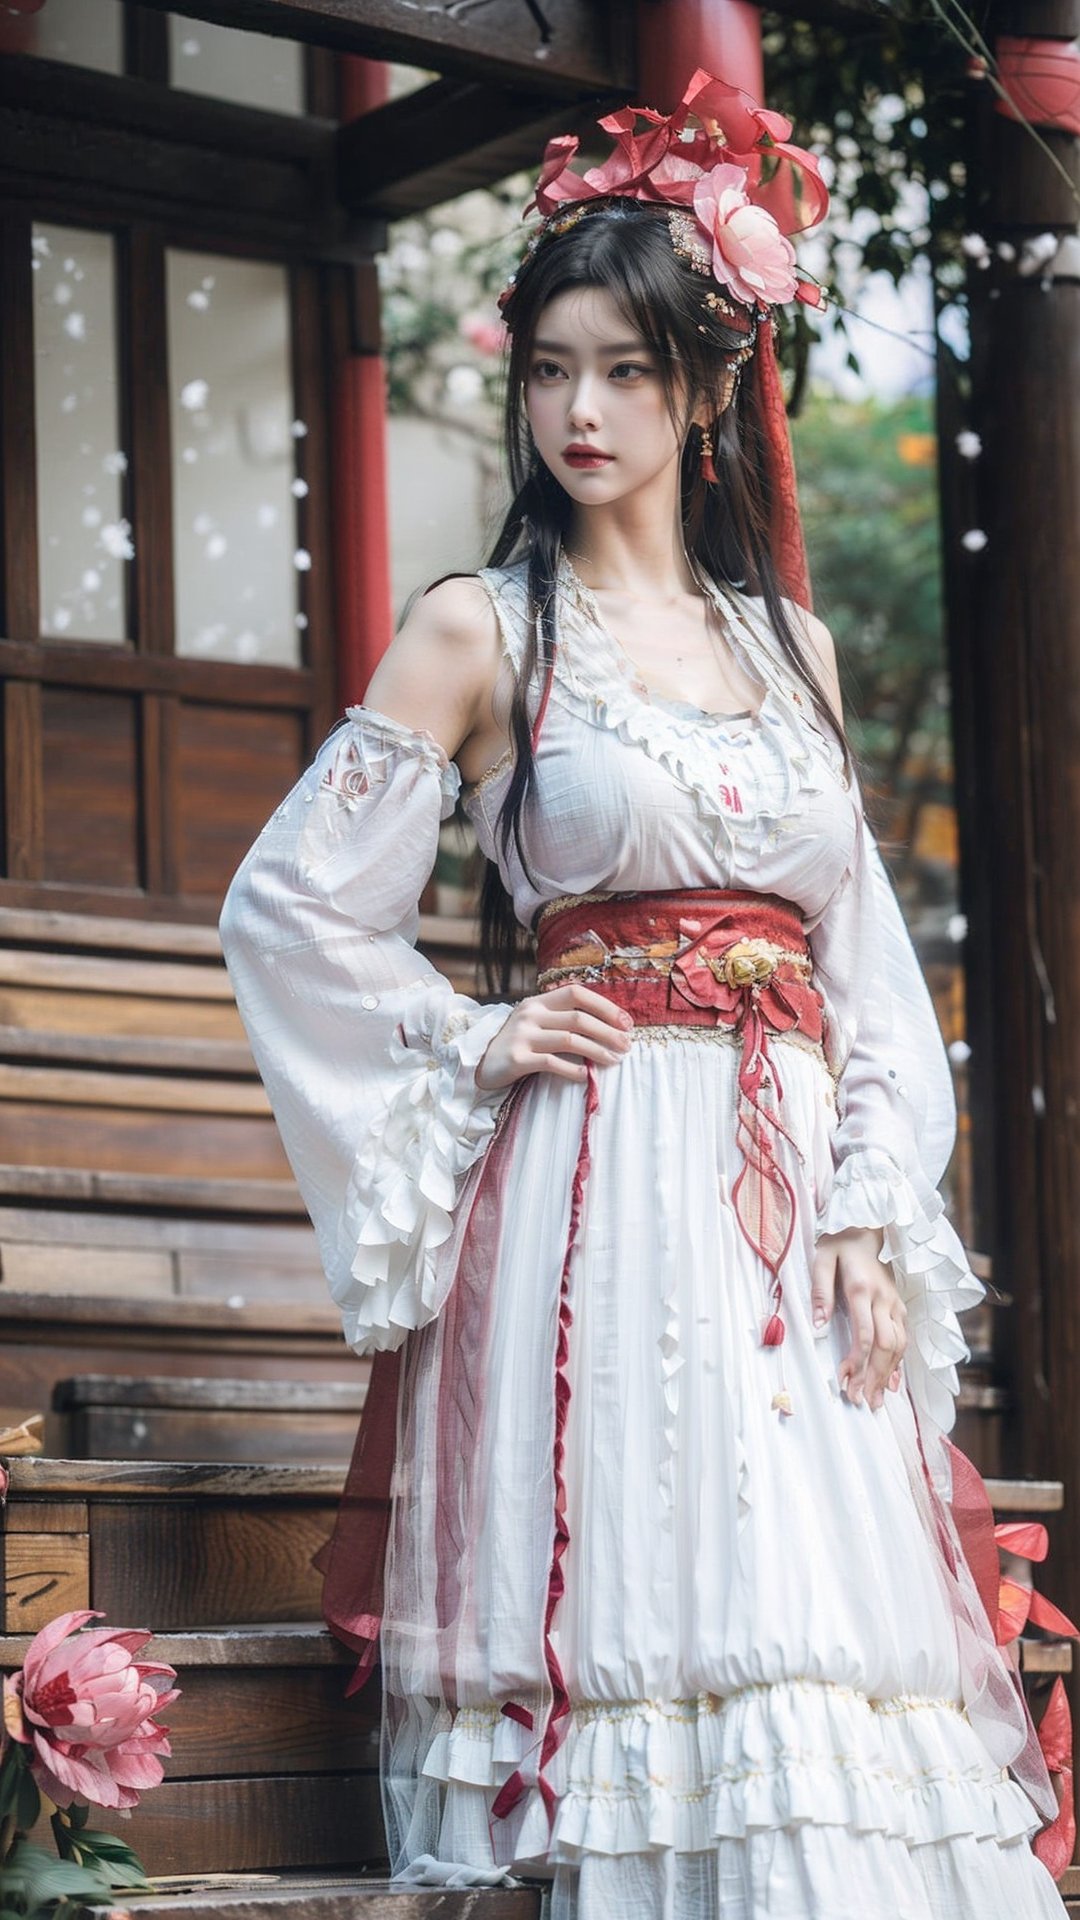 hanfu, Best Quality, masterpiece, (Snowing:1.3),1 girl, (long hair:1.2),  (big breasts:1.89),(Upper body photo:1.3),hanfu,18-year-old , exquisite , extreme face,creamy skin, fair skin,realistic skin details, (super-detail) , long hair, (big breasts:1.69),1girl,long skirt,long sleeves,(Peony flowers, plum blossoms:1.5),(flower:1.3),tangdynastyhanfu, hanfu2,myhanfu, chang,Sit on the steps, hands on hips,embroidered flower patterns,hanfulolita